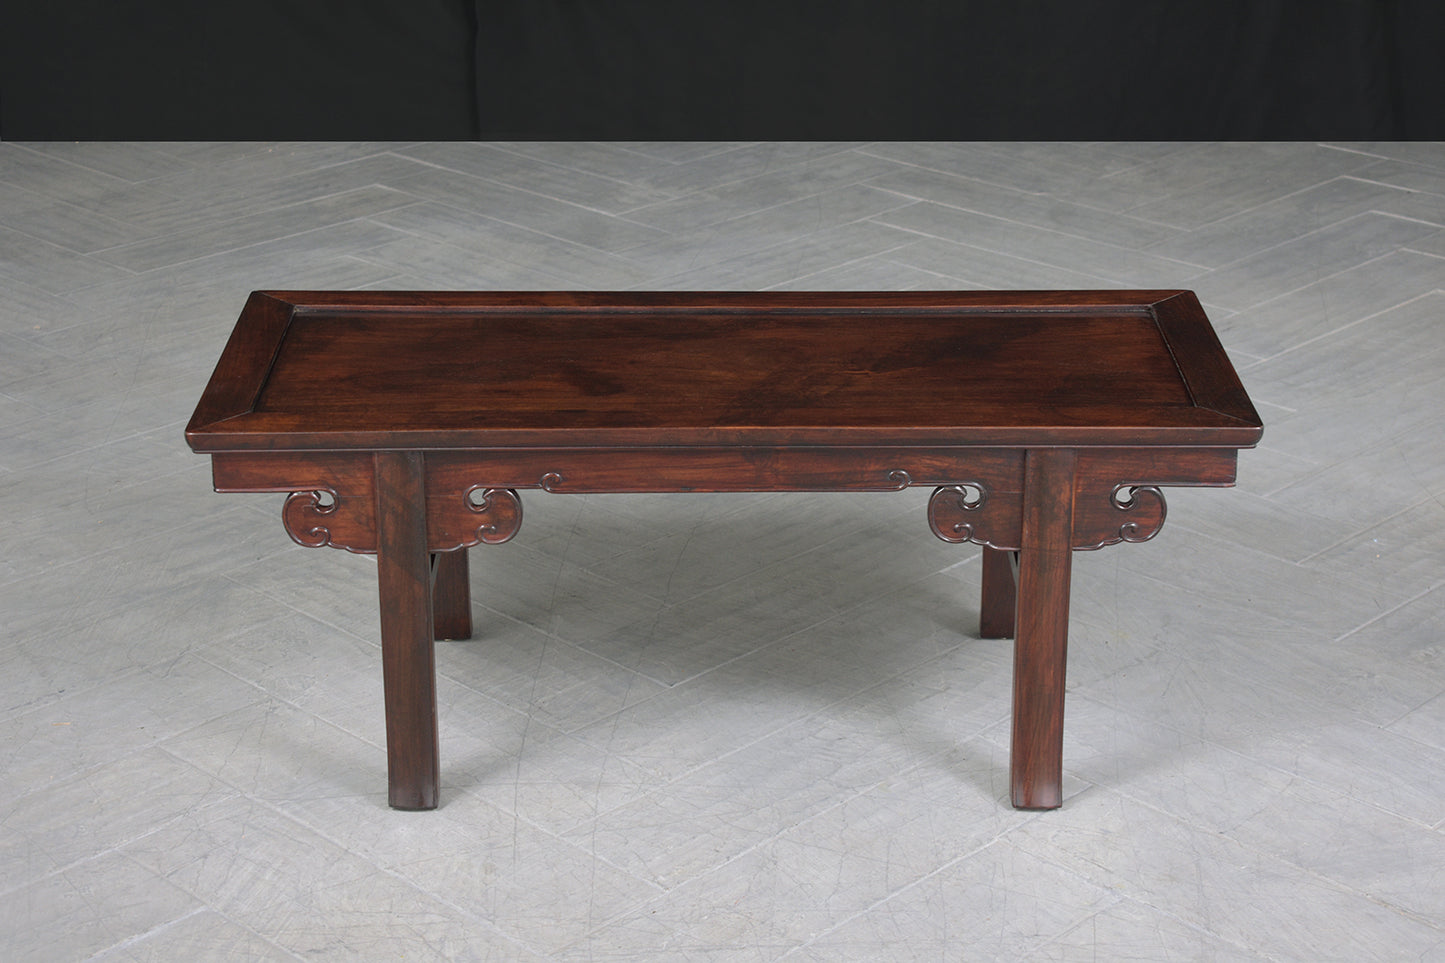 Vintage Chinese Bench